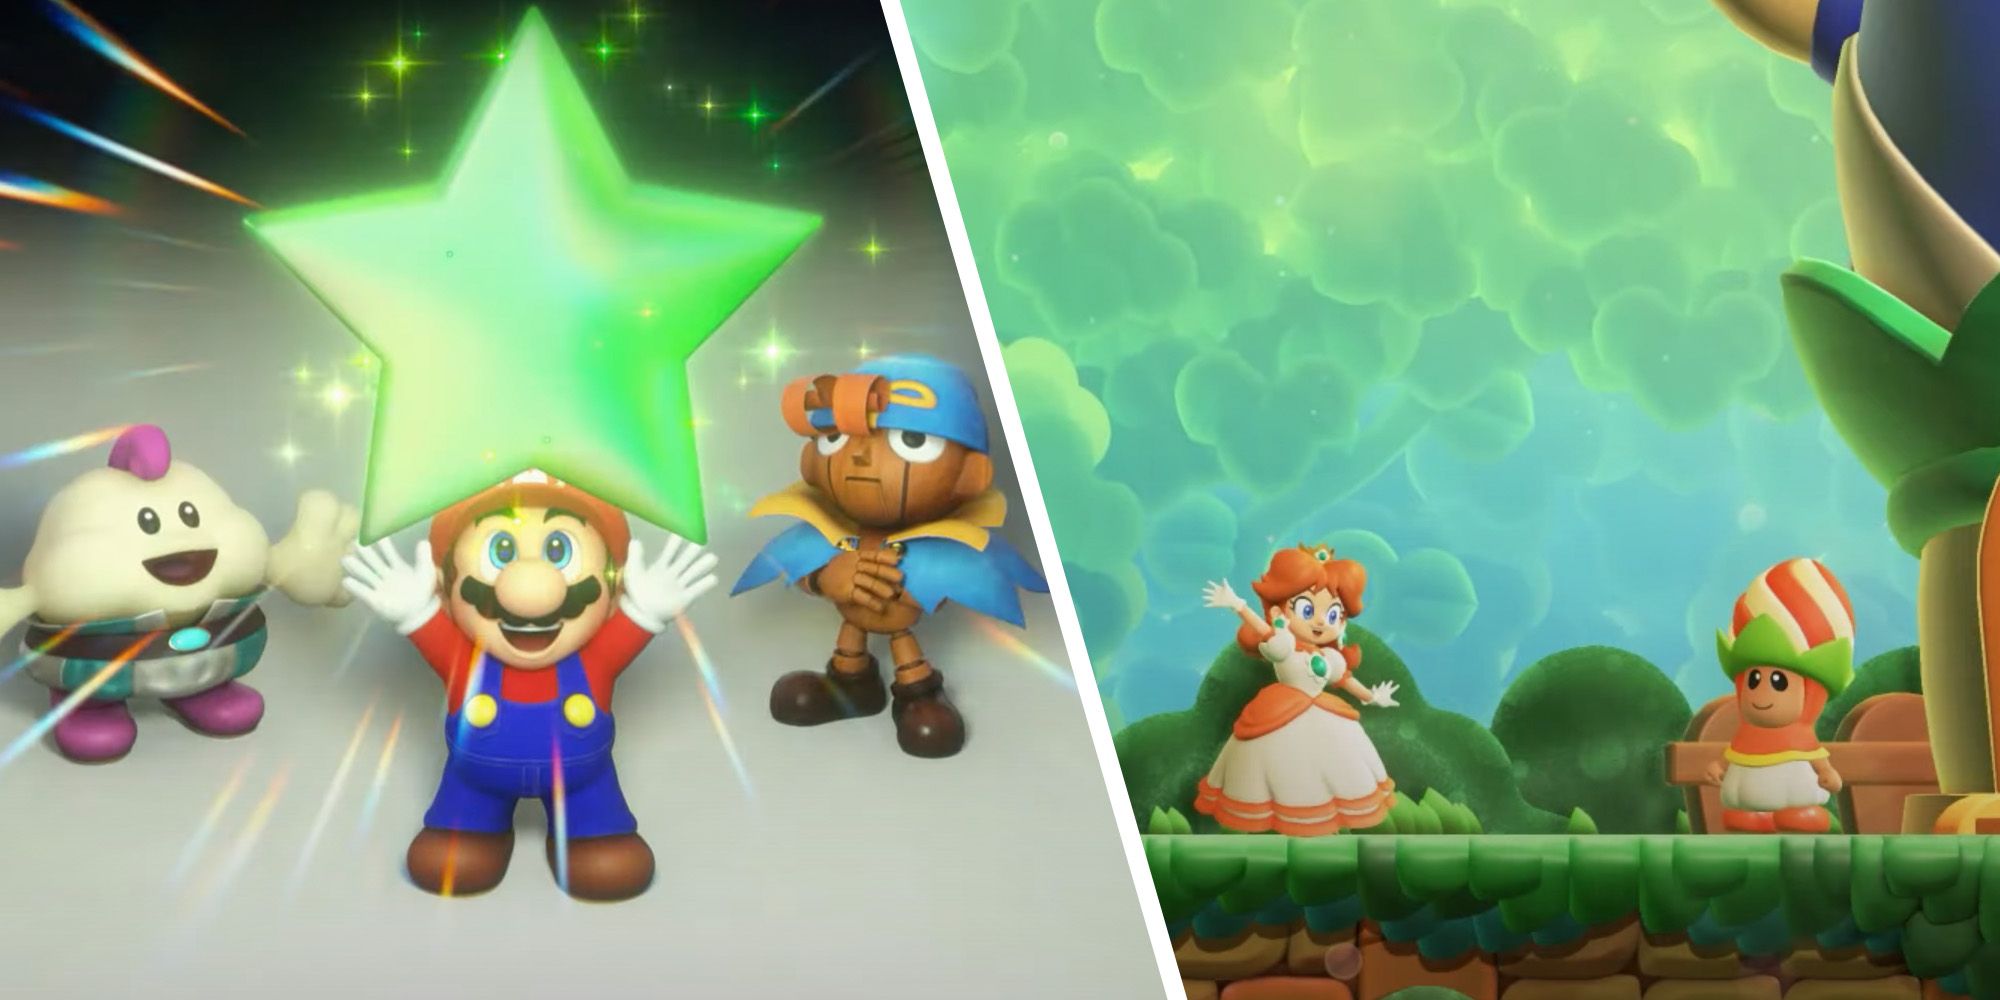 Split image of Mario, Geno, and Mallow from Super Mario RPG Remake and Daisy and a Poplin from Super Mario Bros Wonder